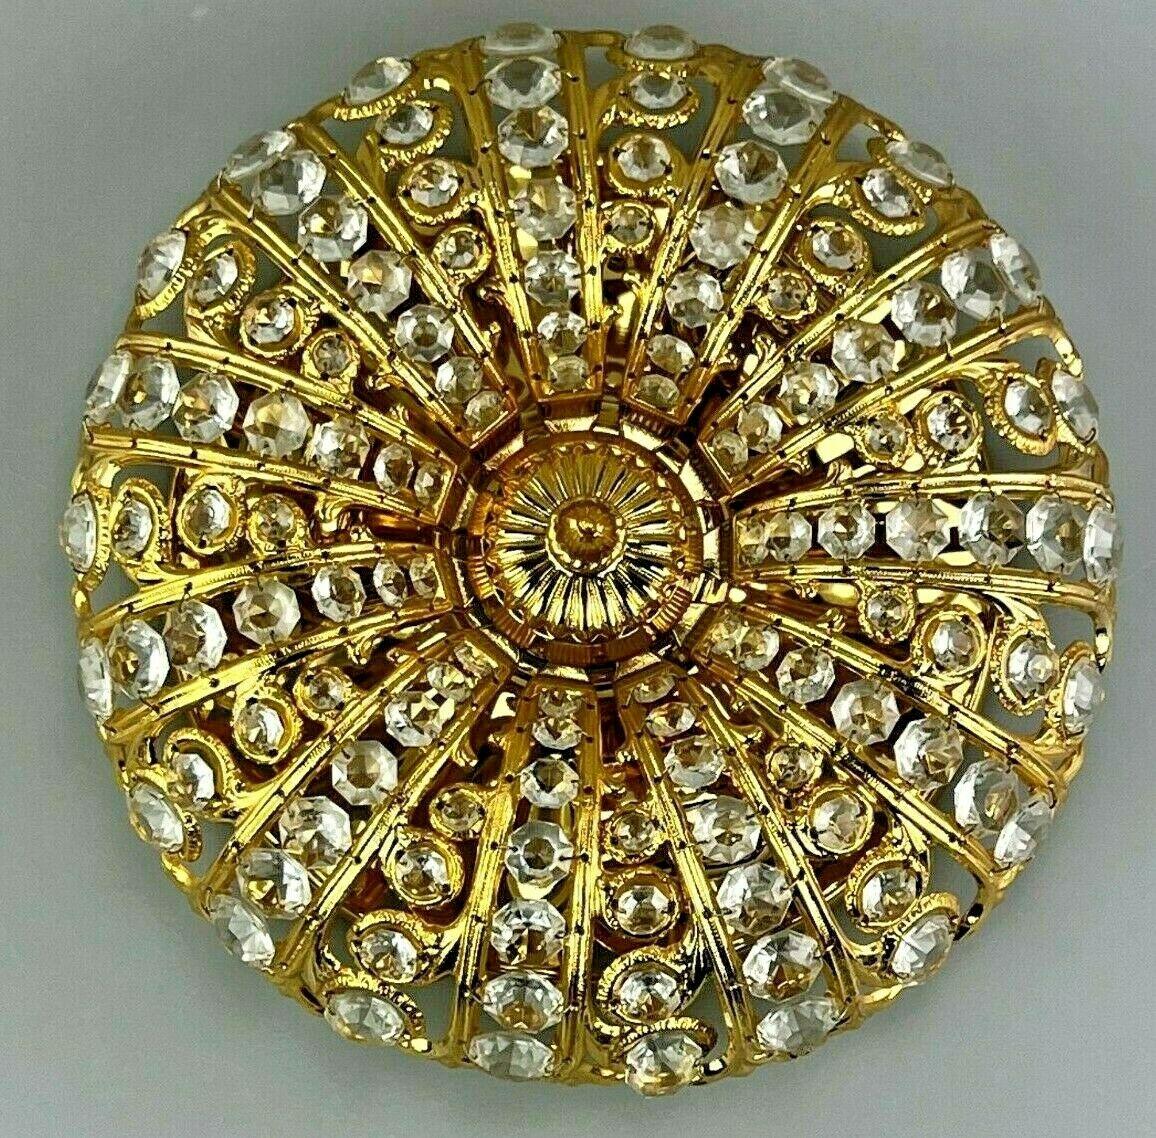 60s 70s lamp Peris Andreu S.A. Riper Plafoniere ceiling lamp brass glass

Object: plafoniere

Manufacturer: S.A. rippers

Condition: good

Age: around 1960-1970

Dimensions:

Diameter = 32cm
Height = 9cm

Other notes:

The pictures